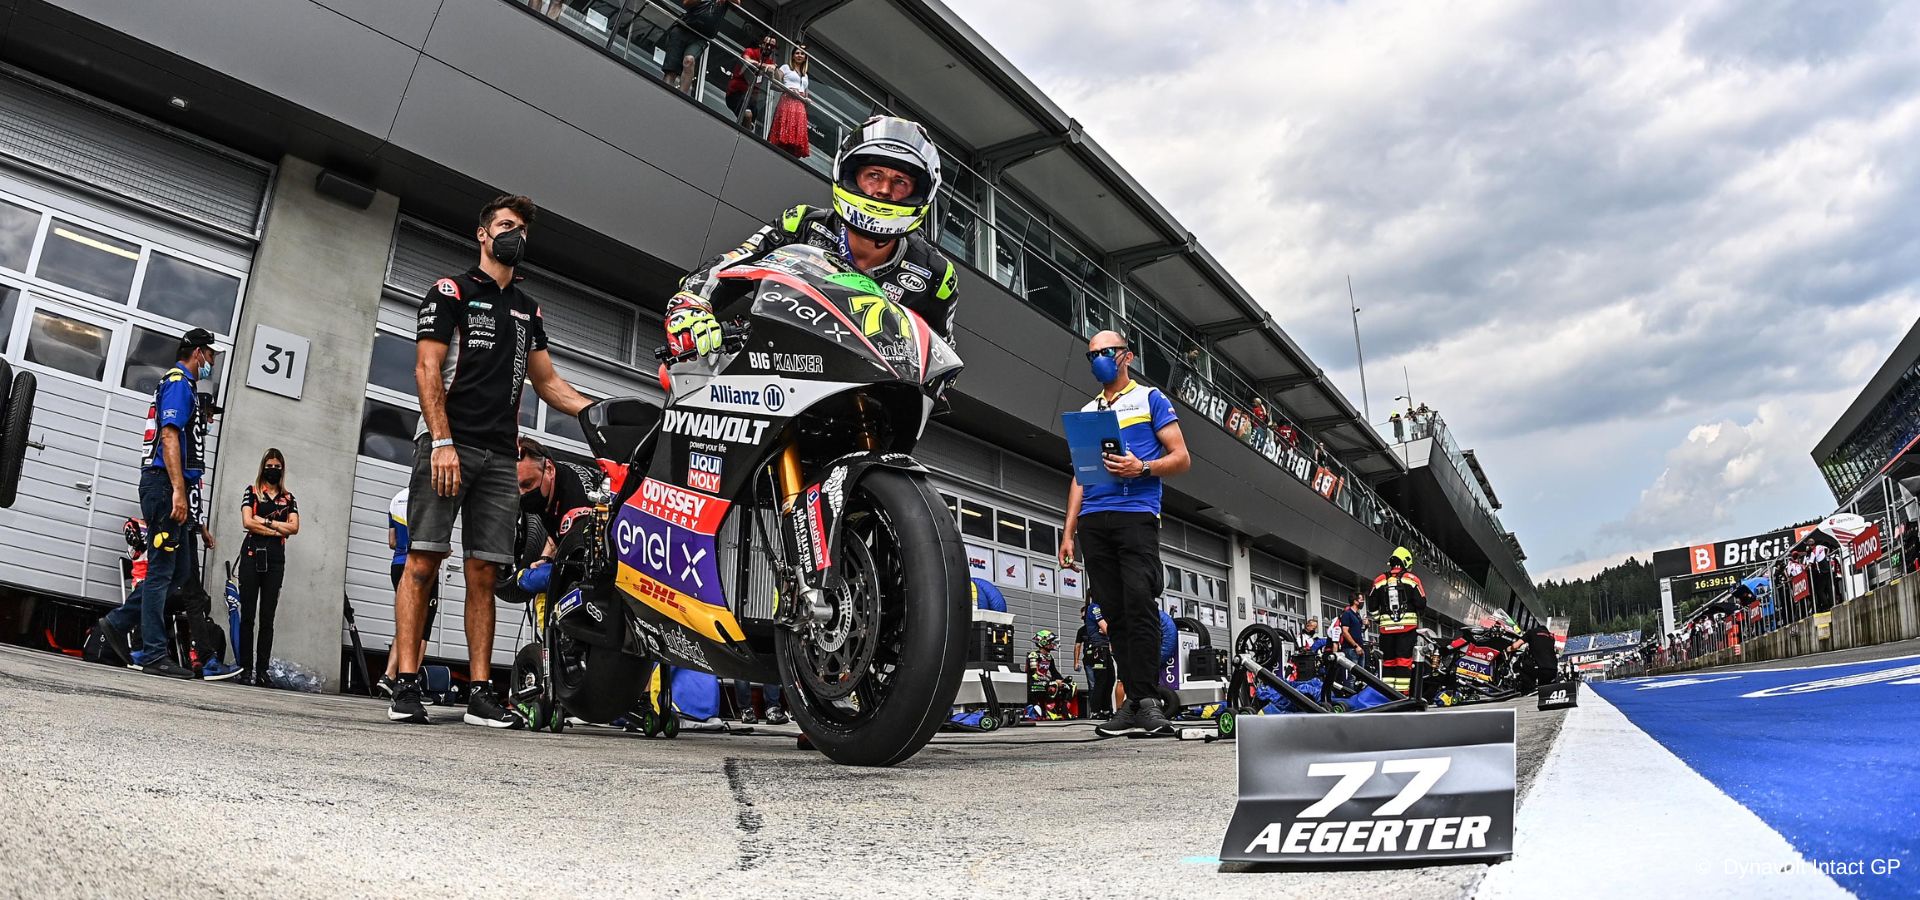 In Austria the start of the last phase of the MotoE World Cup 2022